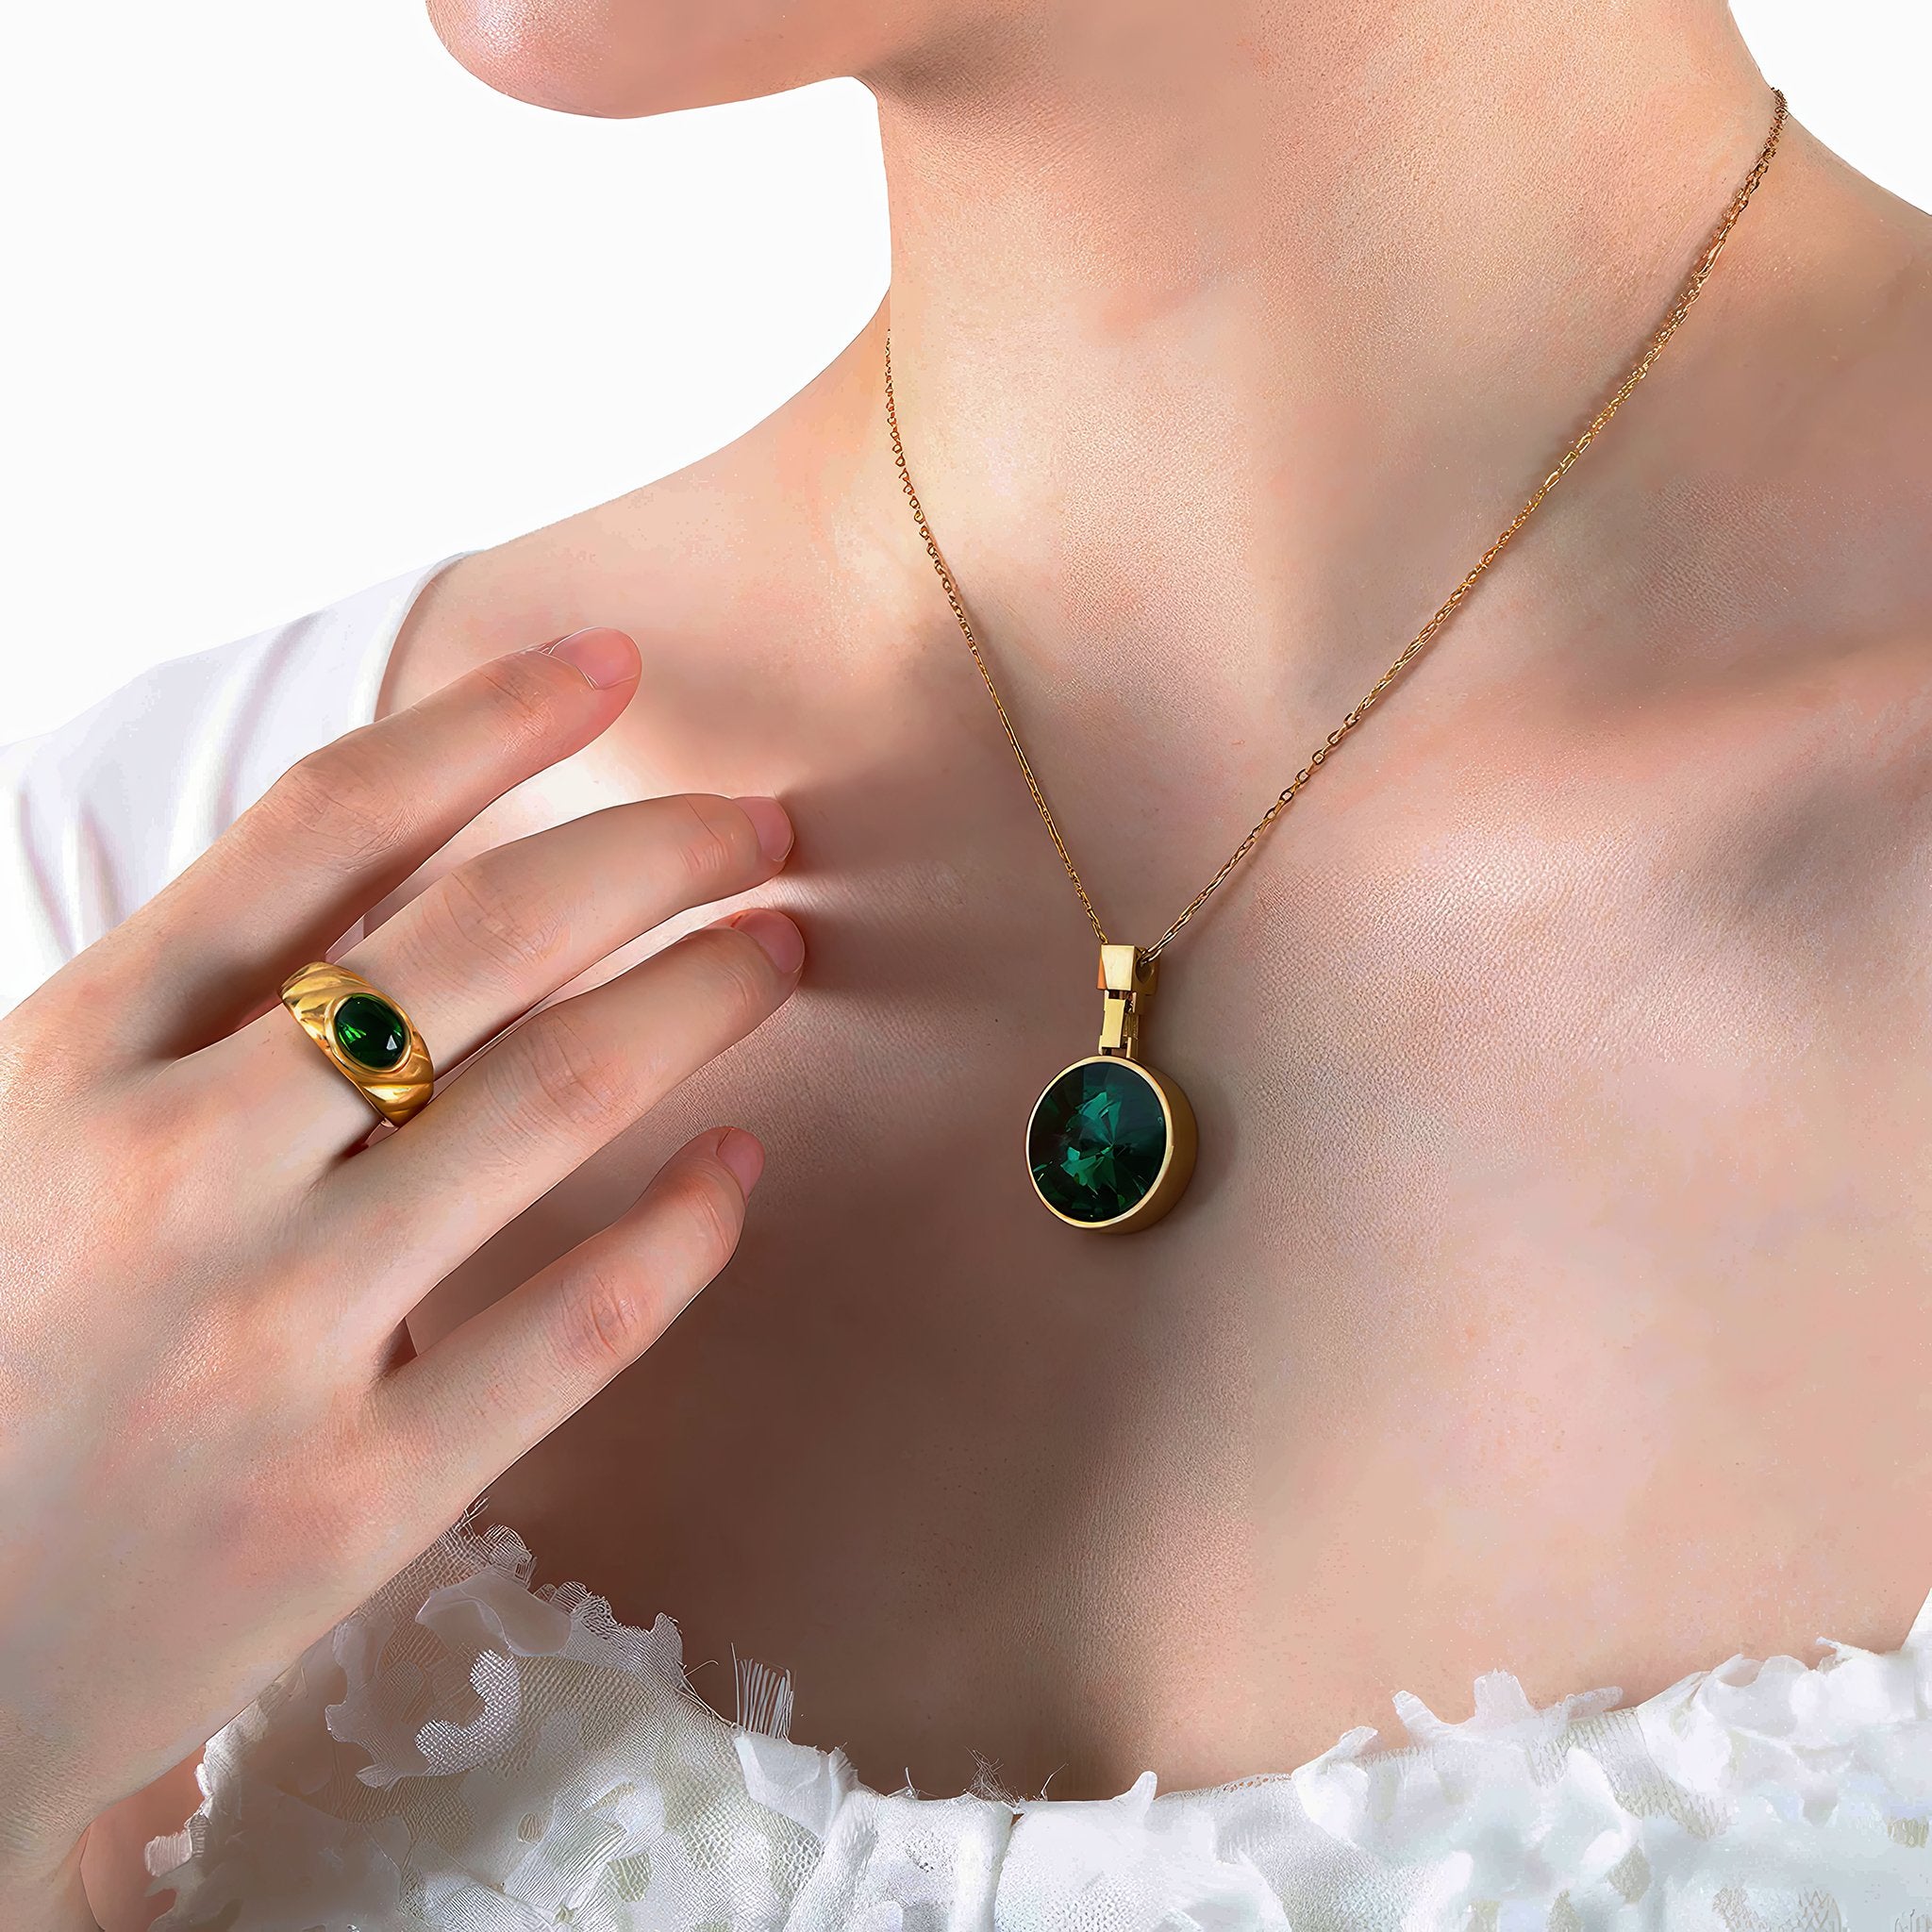 Classic Retro Round Gemstone-Inlaid Necklace - Nobbier - Necklace - 18K Gold And Titanium PVD Coated Jewelry